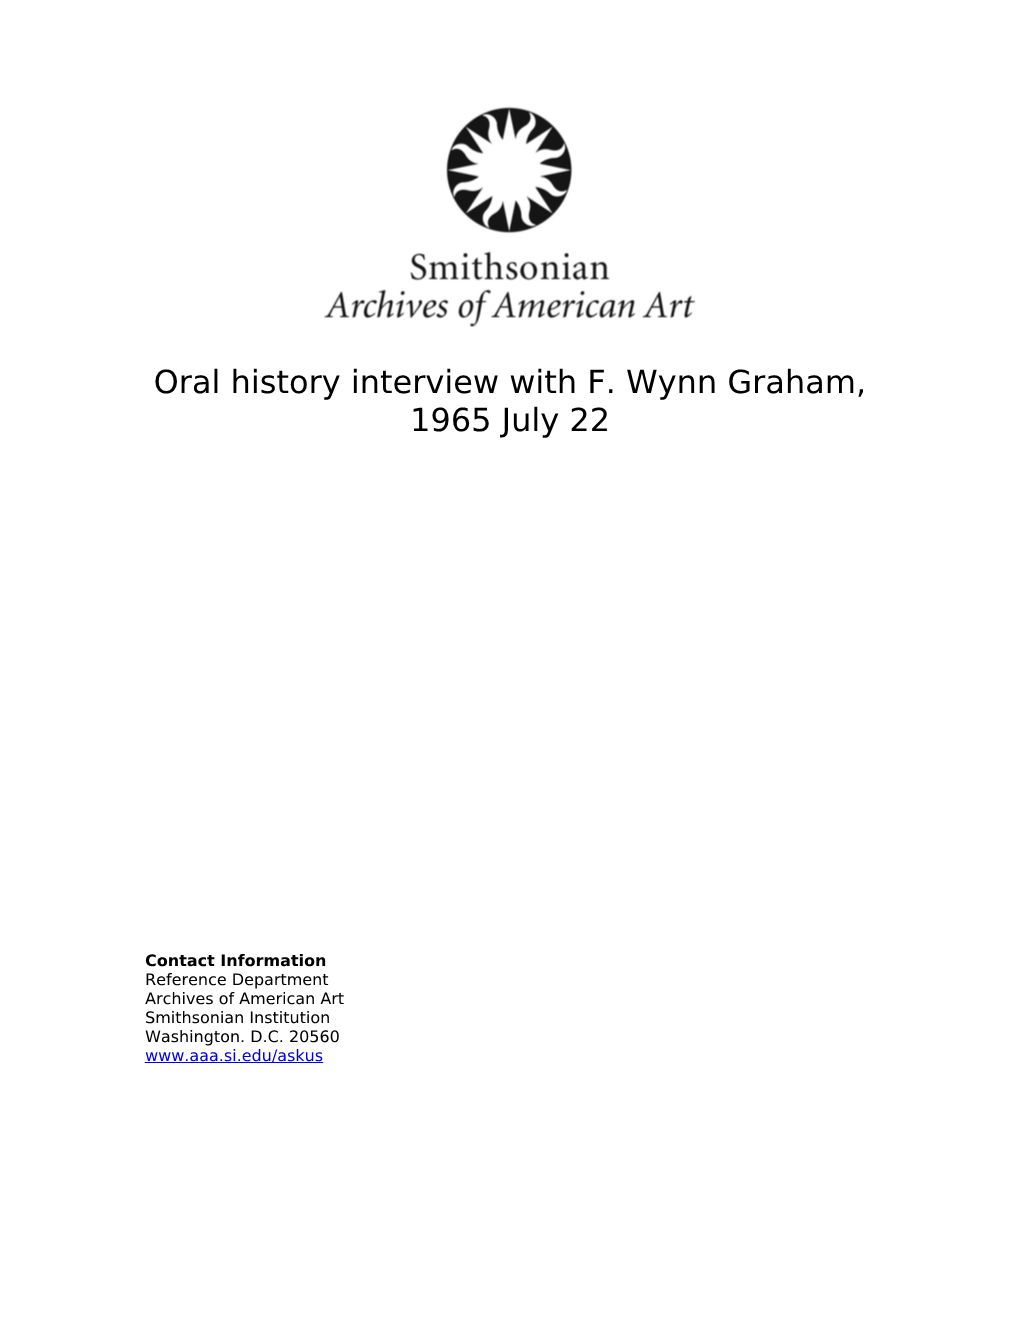 Oral History Interview with F. Wynn Graham, 1965 July 22